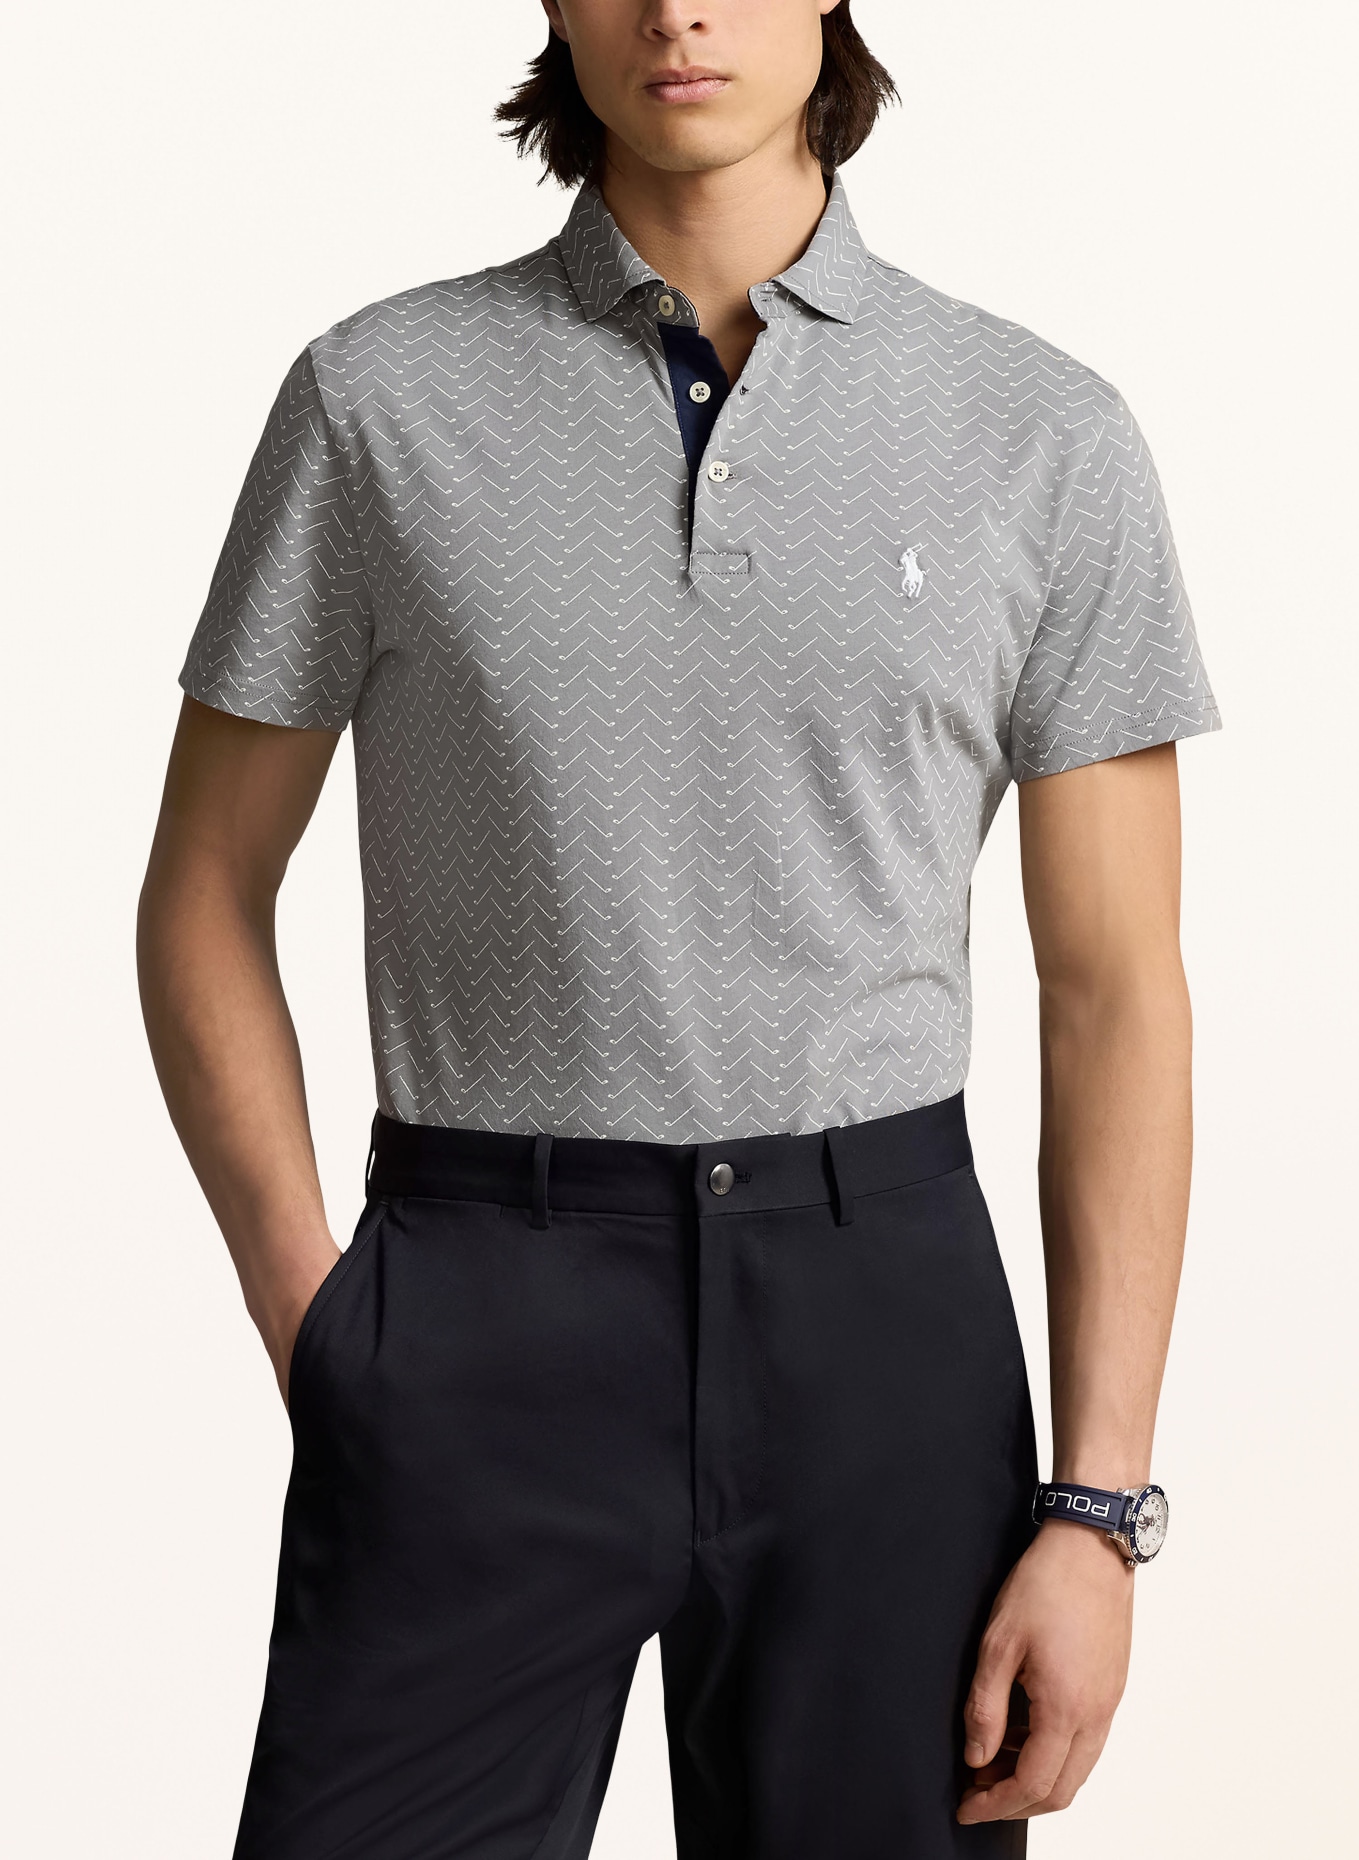 POLO GOLF RALPH LAUREN Jersey polo shirt tailored fit, Color: GRAY (Image 4)